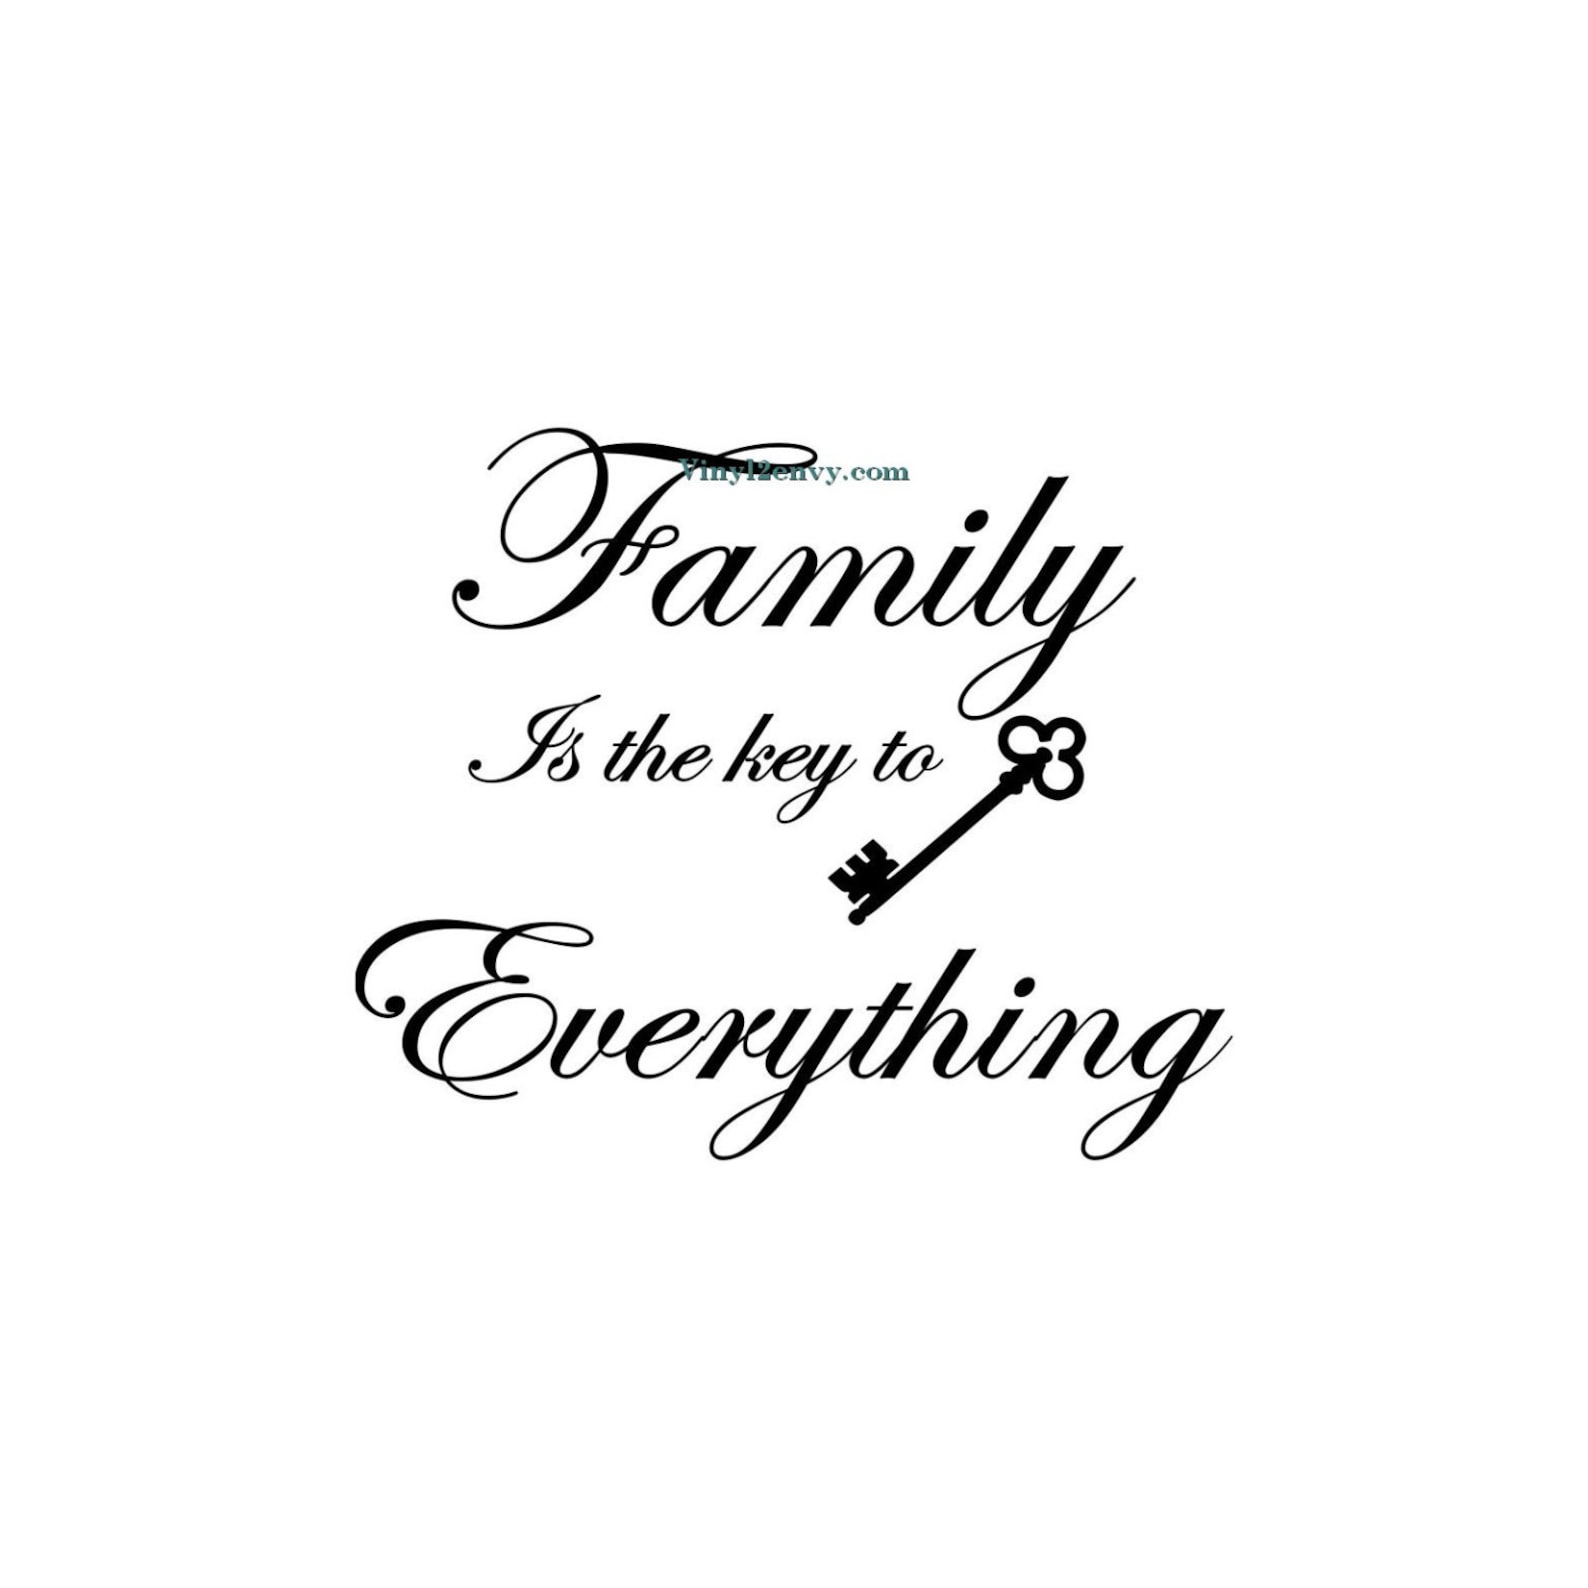 Family is everything. My Family is my everything тату. Family is my Life. My Family is my Life. My Family, everything тату.